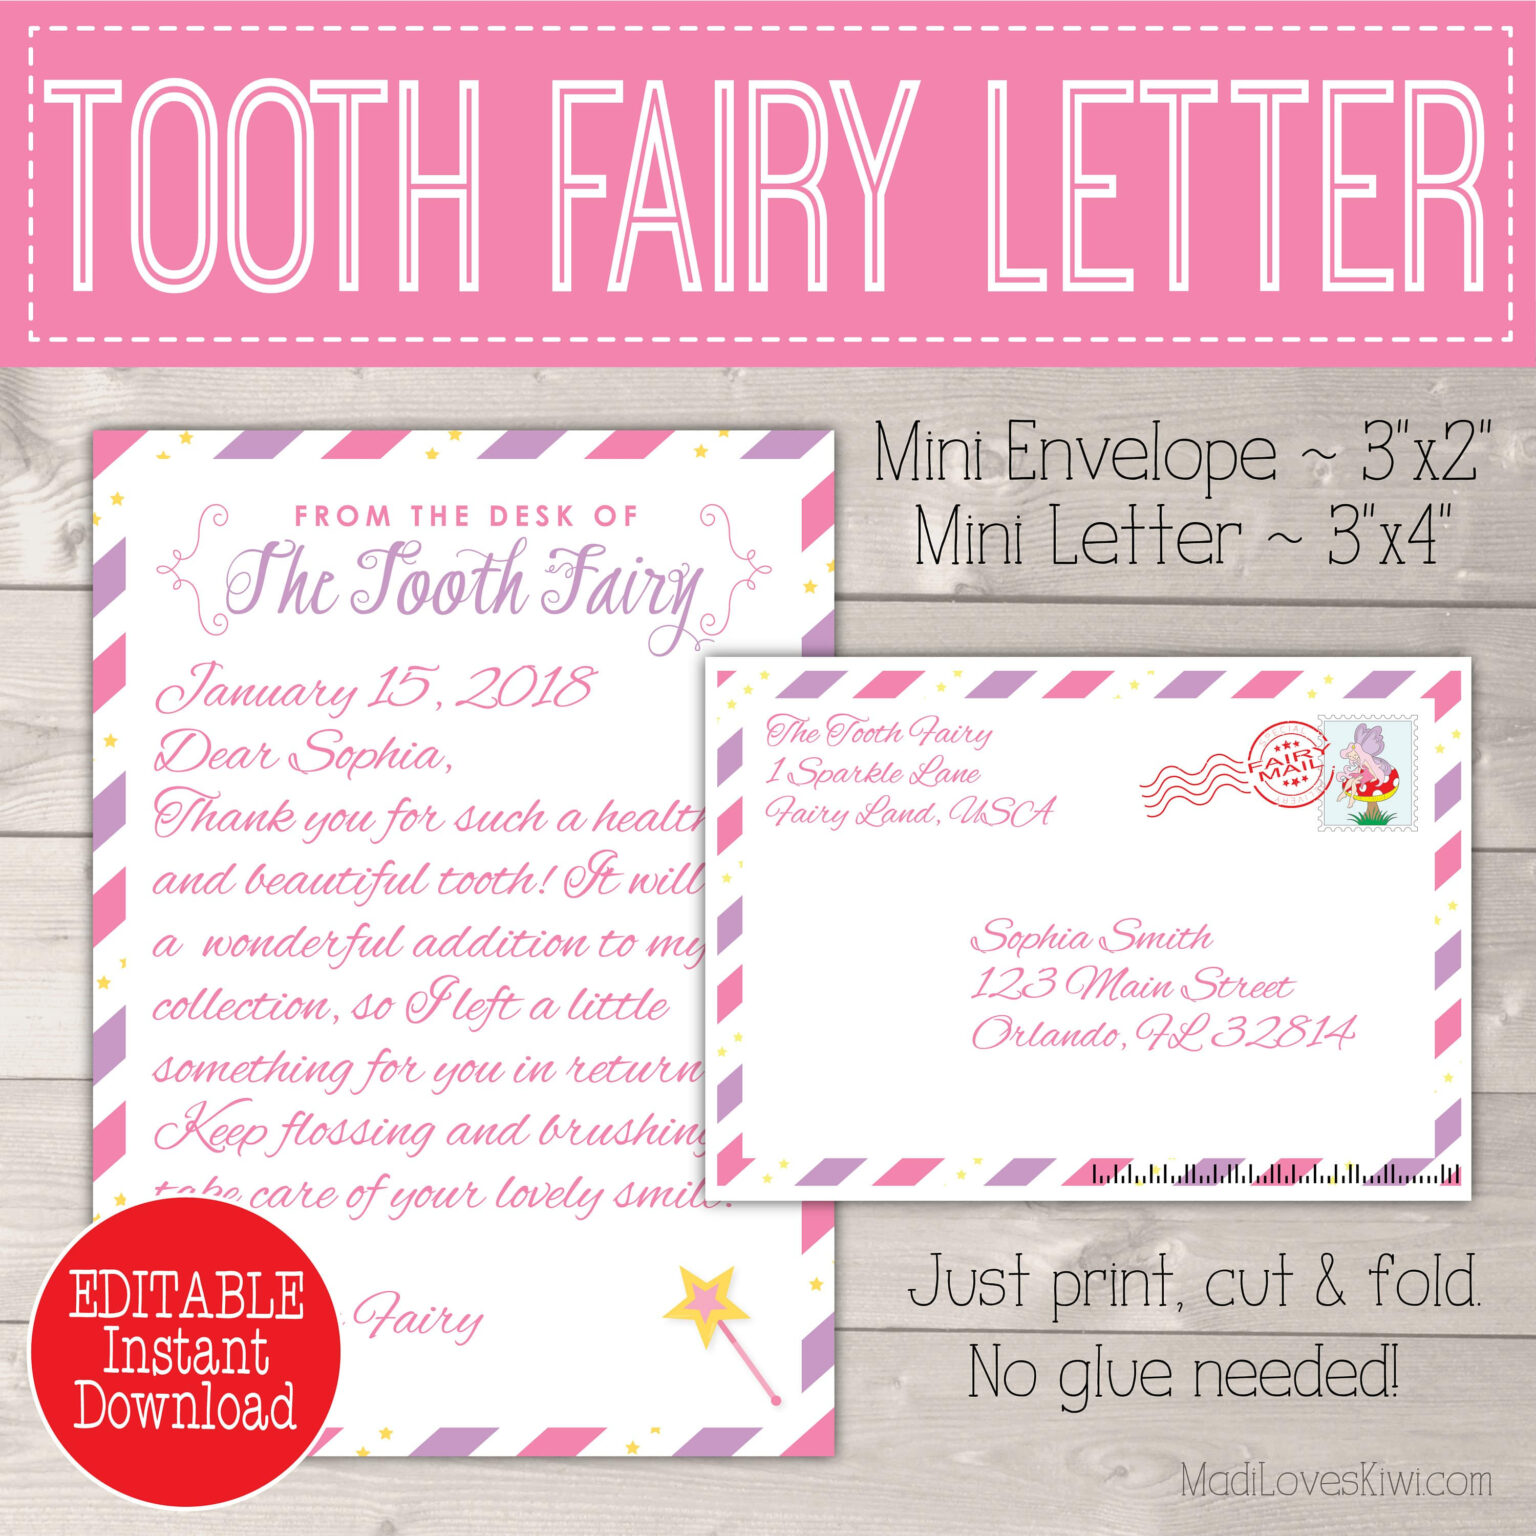 free-tooth-fairy-letter-template-word-corporationplm